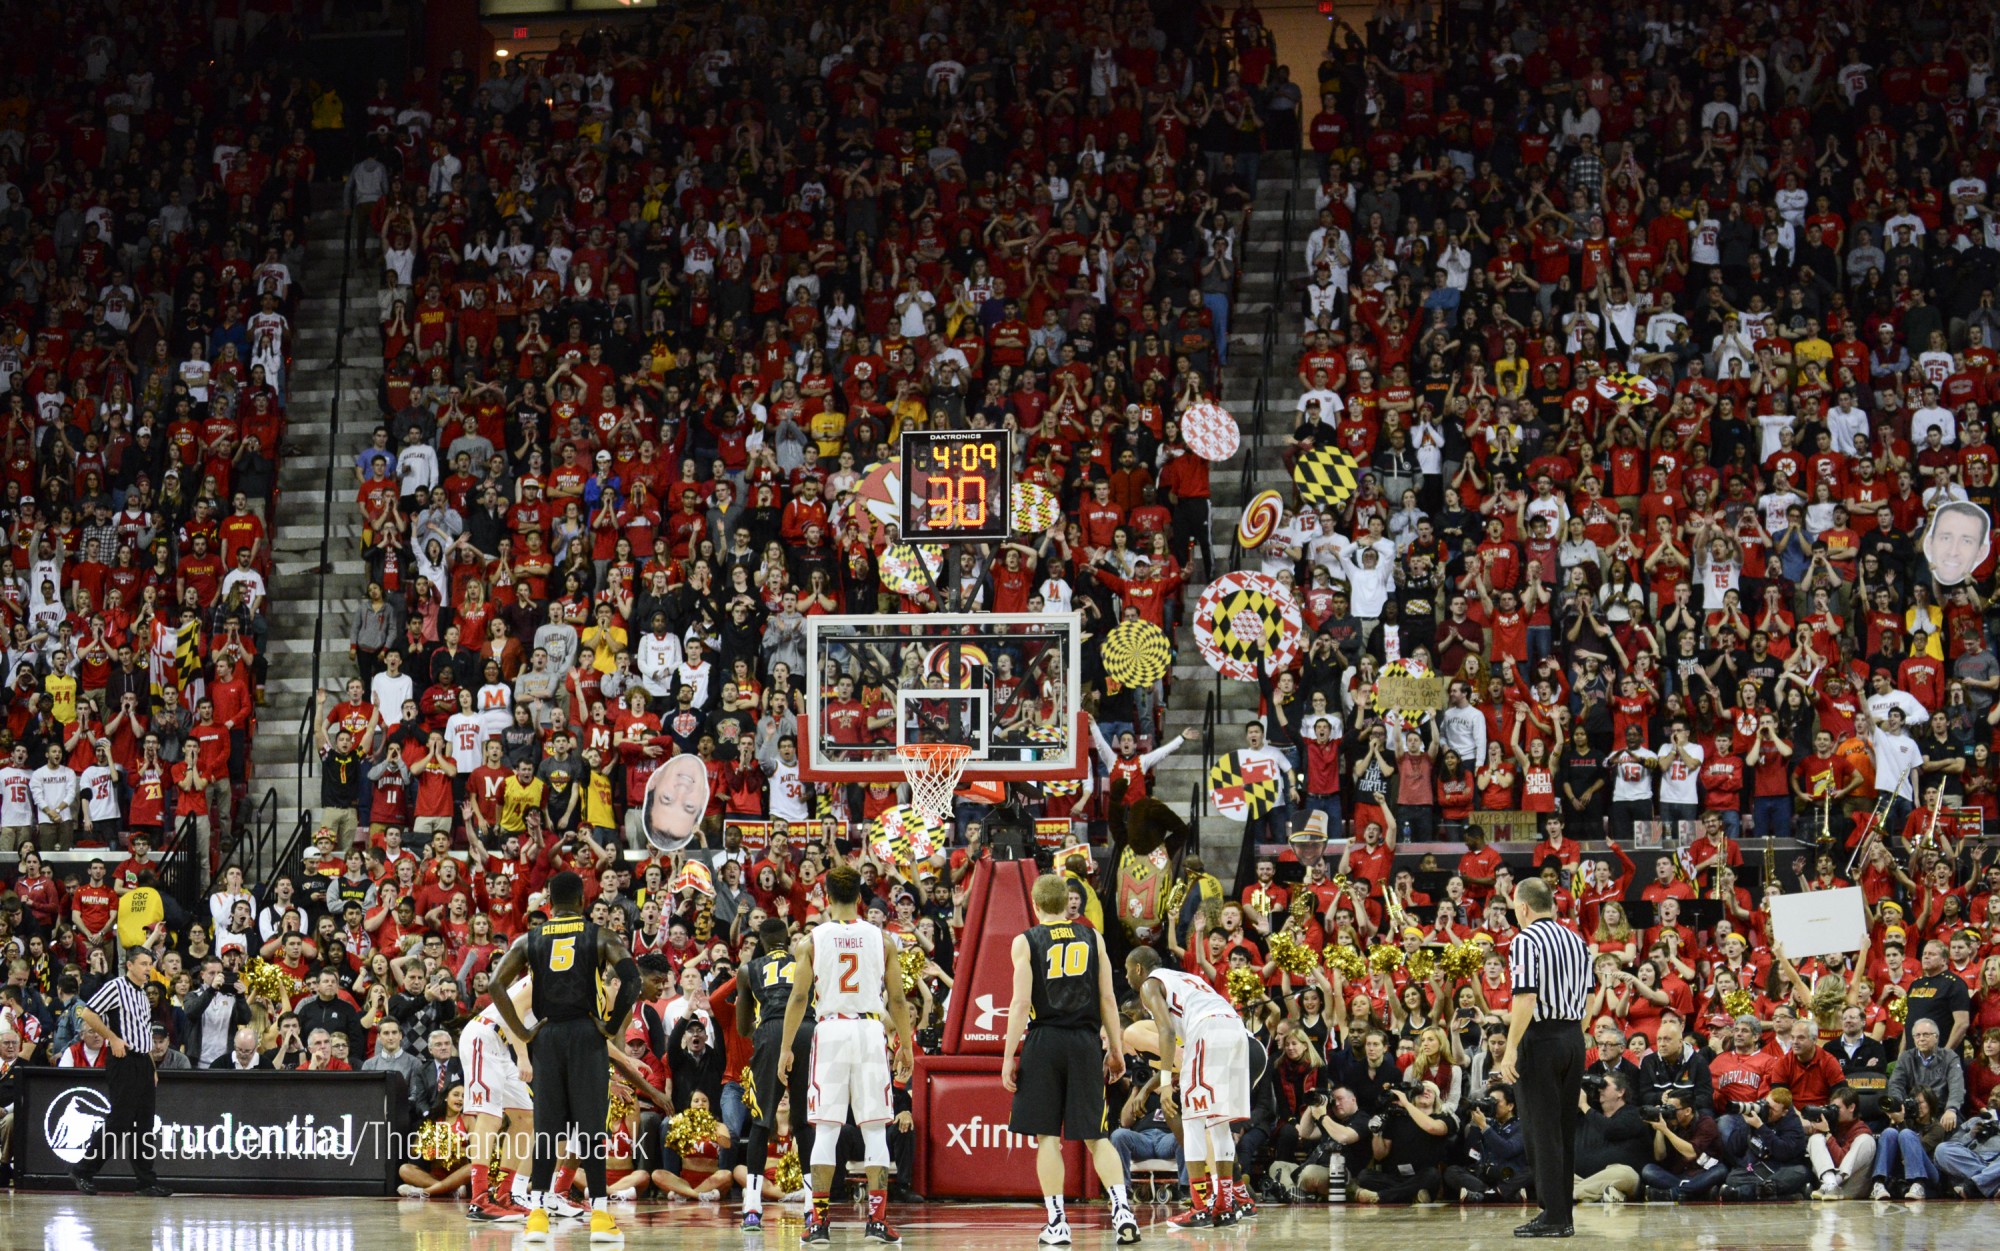 Maryland Men's Basketball on X: A celebration of Len. What it